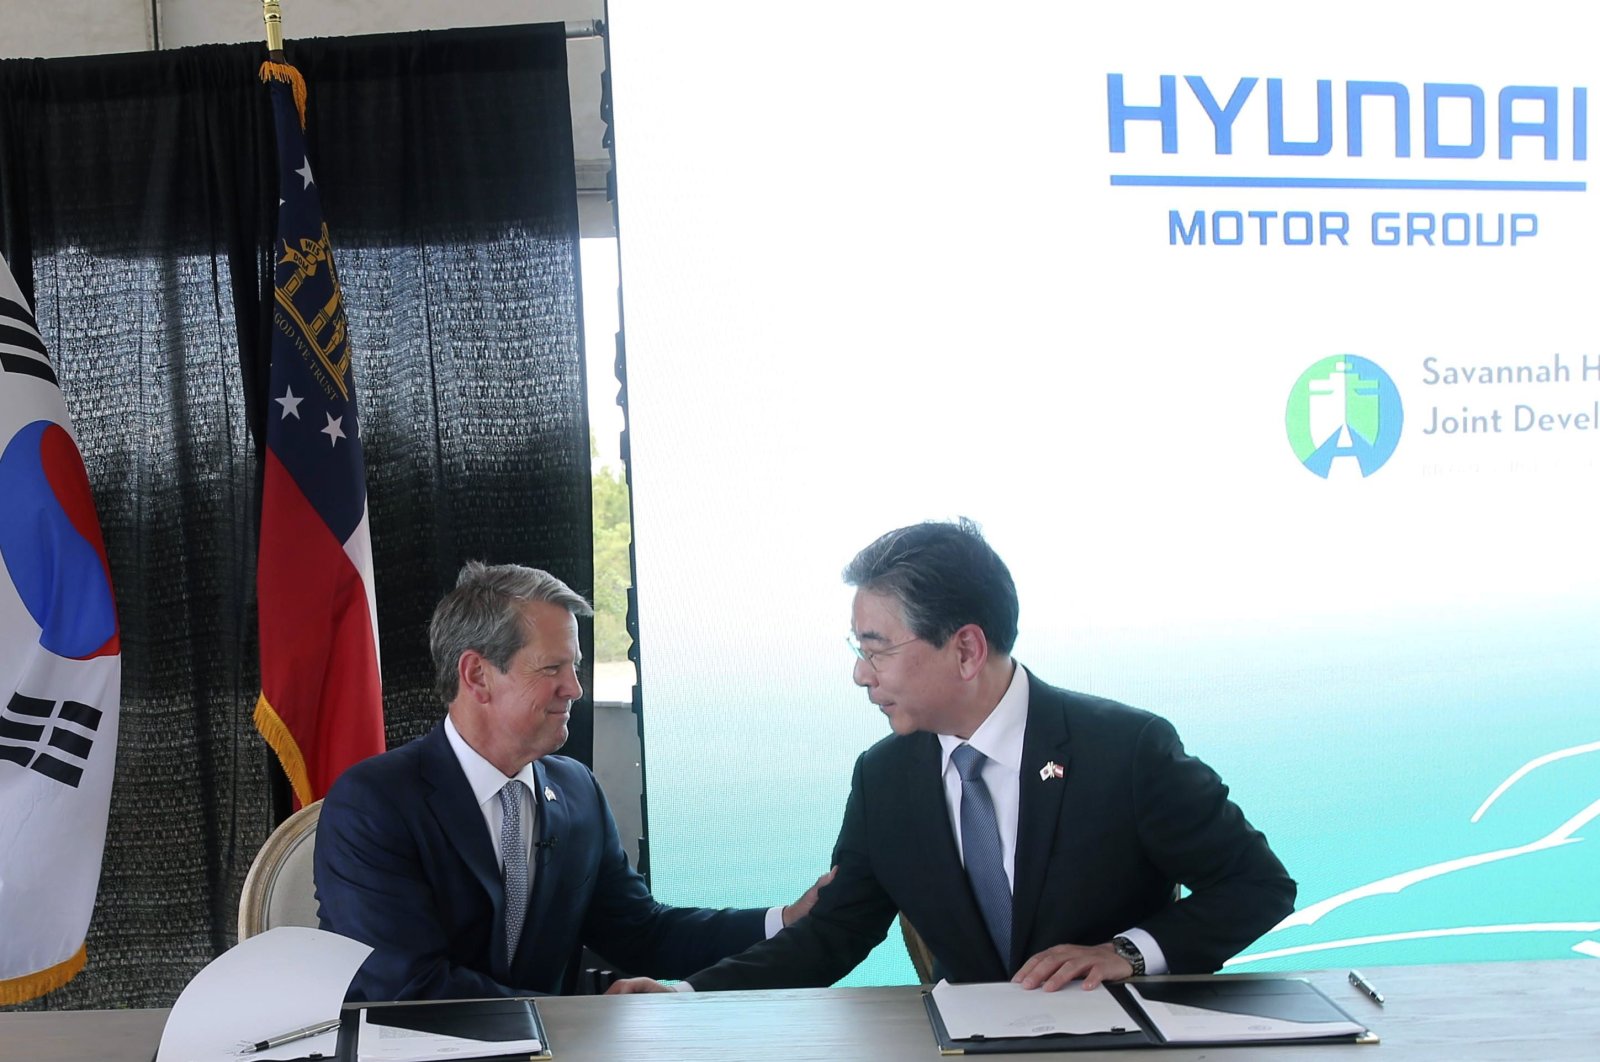 Georgia Governor Bran Kemp (L), and Jaehoon "Jay" Chang, Hyundai Motor Company president and CEO, shake hands after signing an agreement to finalize a deal for Hyundai Motor Group to build a manufacturing plant, Georgia, U.S., May 20, 2022. (AP Photo)